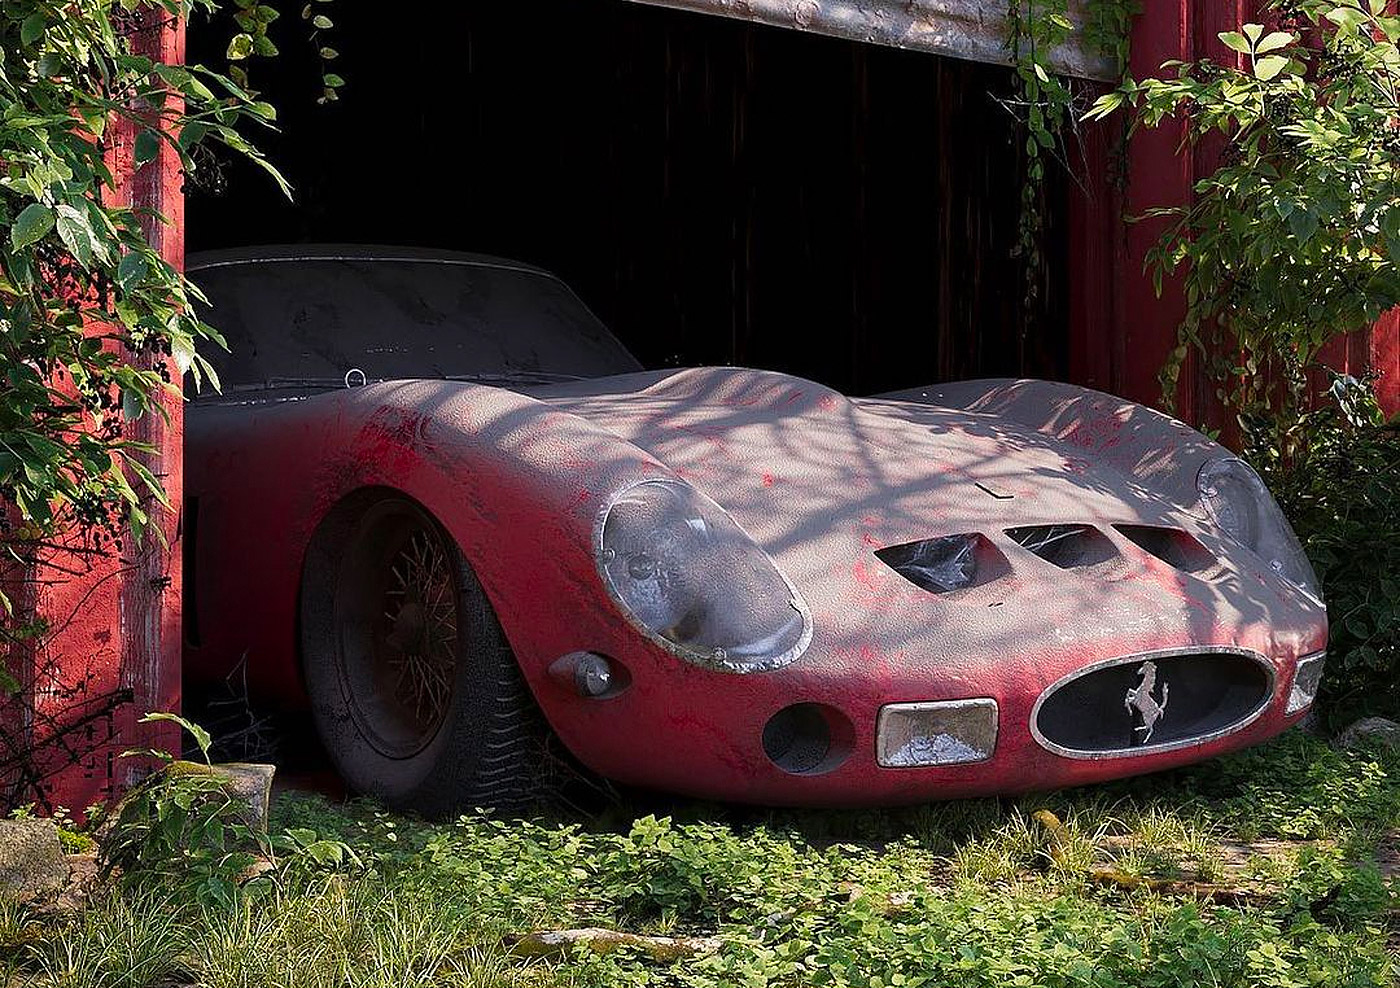 Barn Finds: Abandoned Luxury Vehicles Series by Dizzy Viper